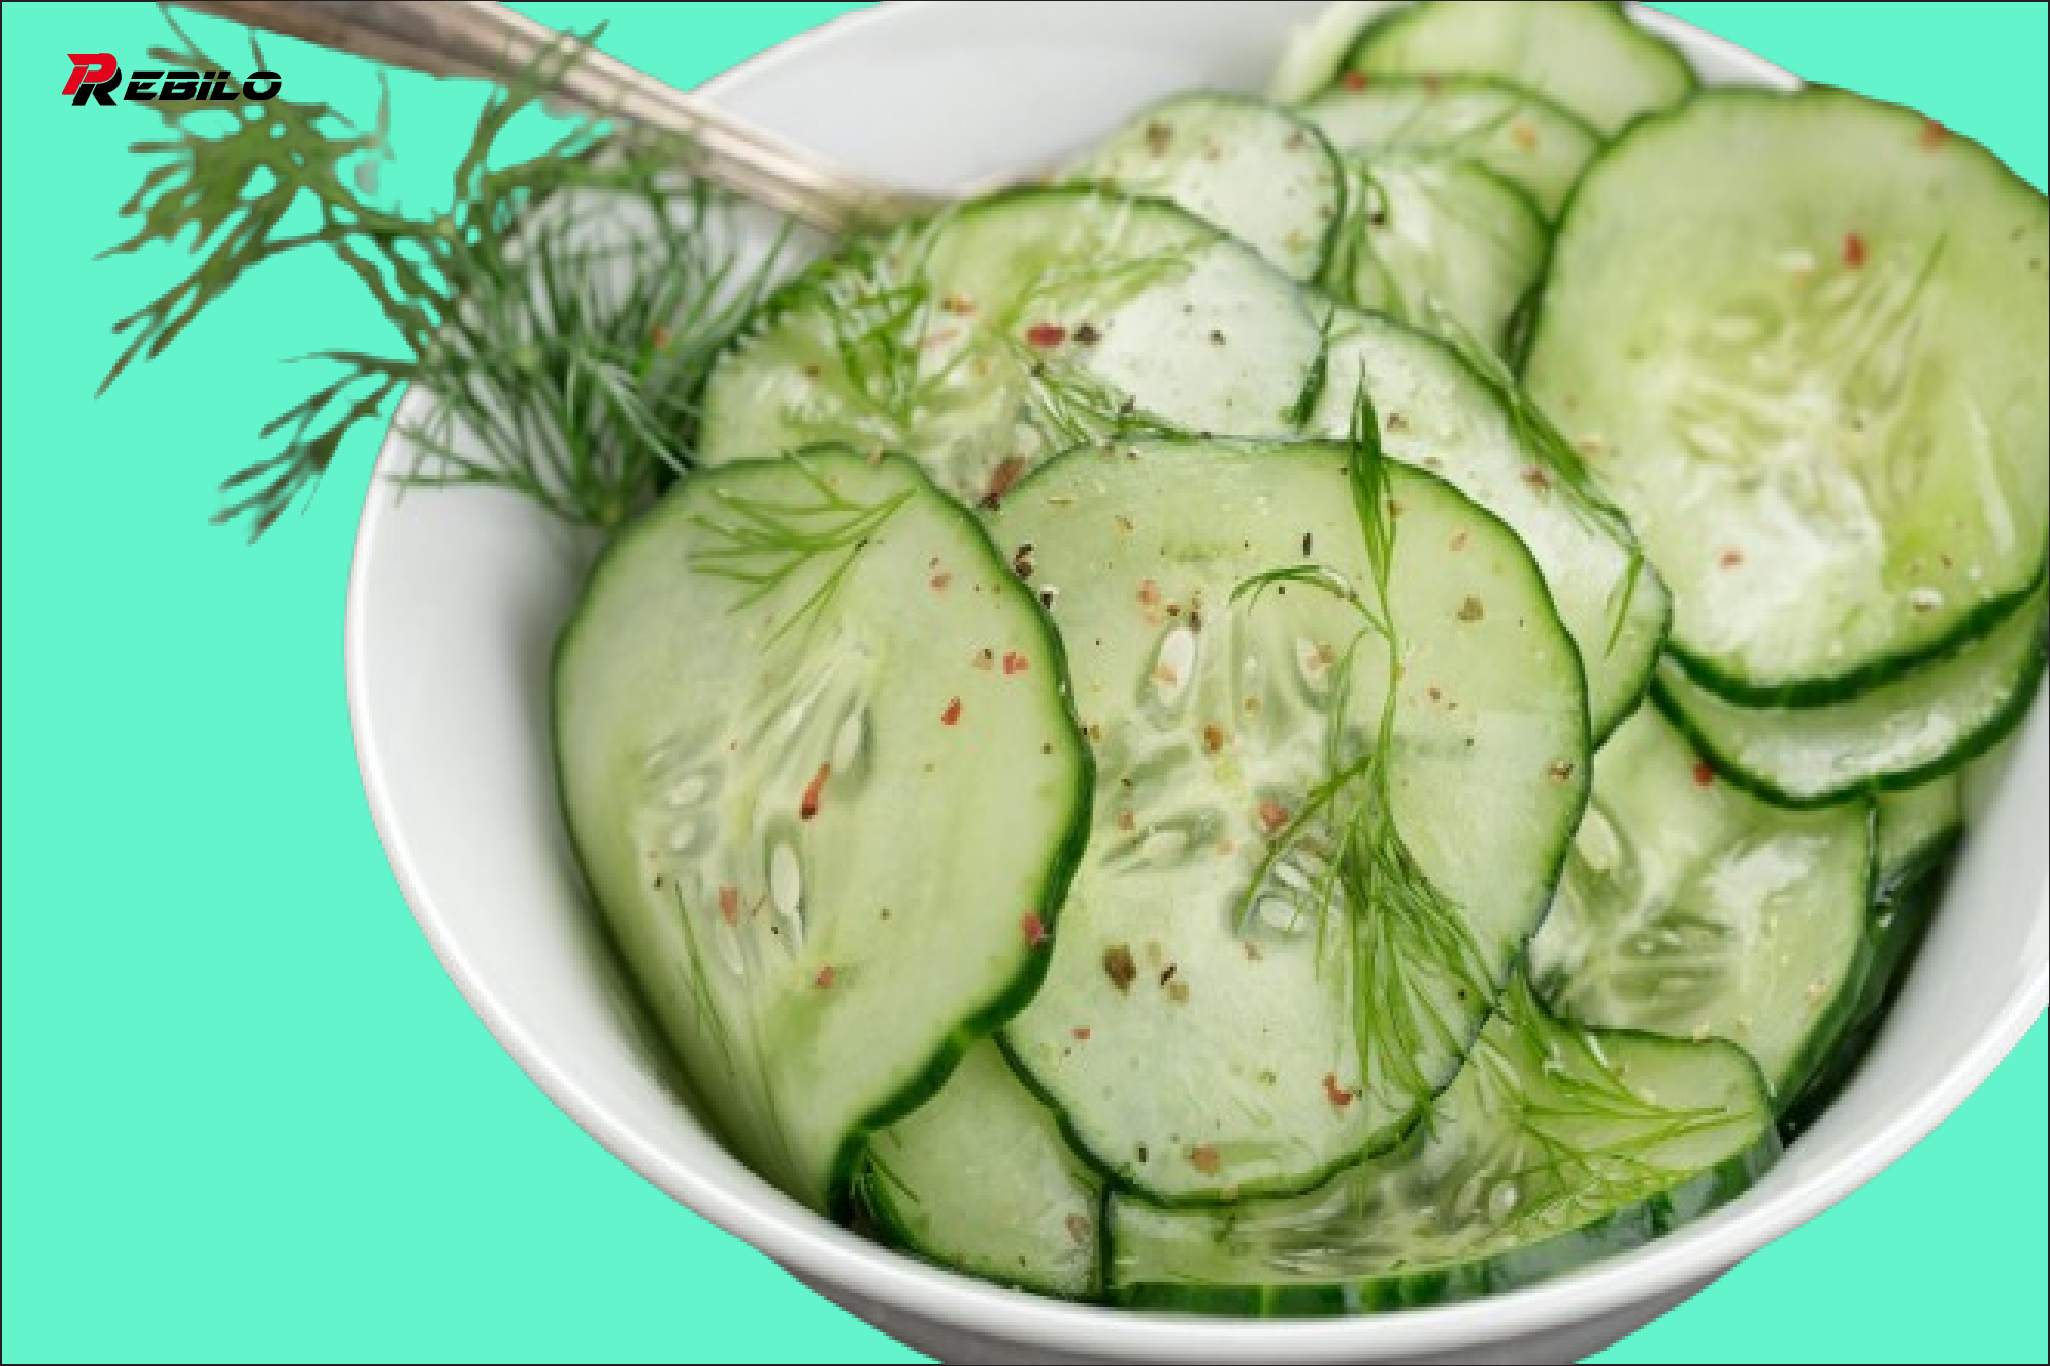 After reading this, you will eat cucumber every day!